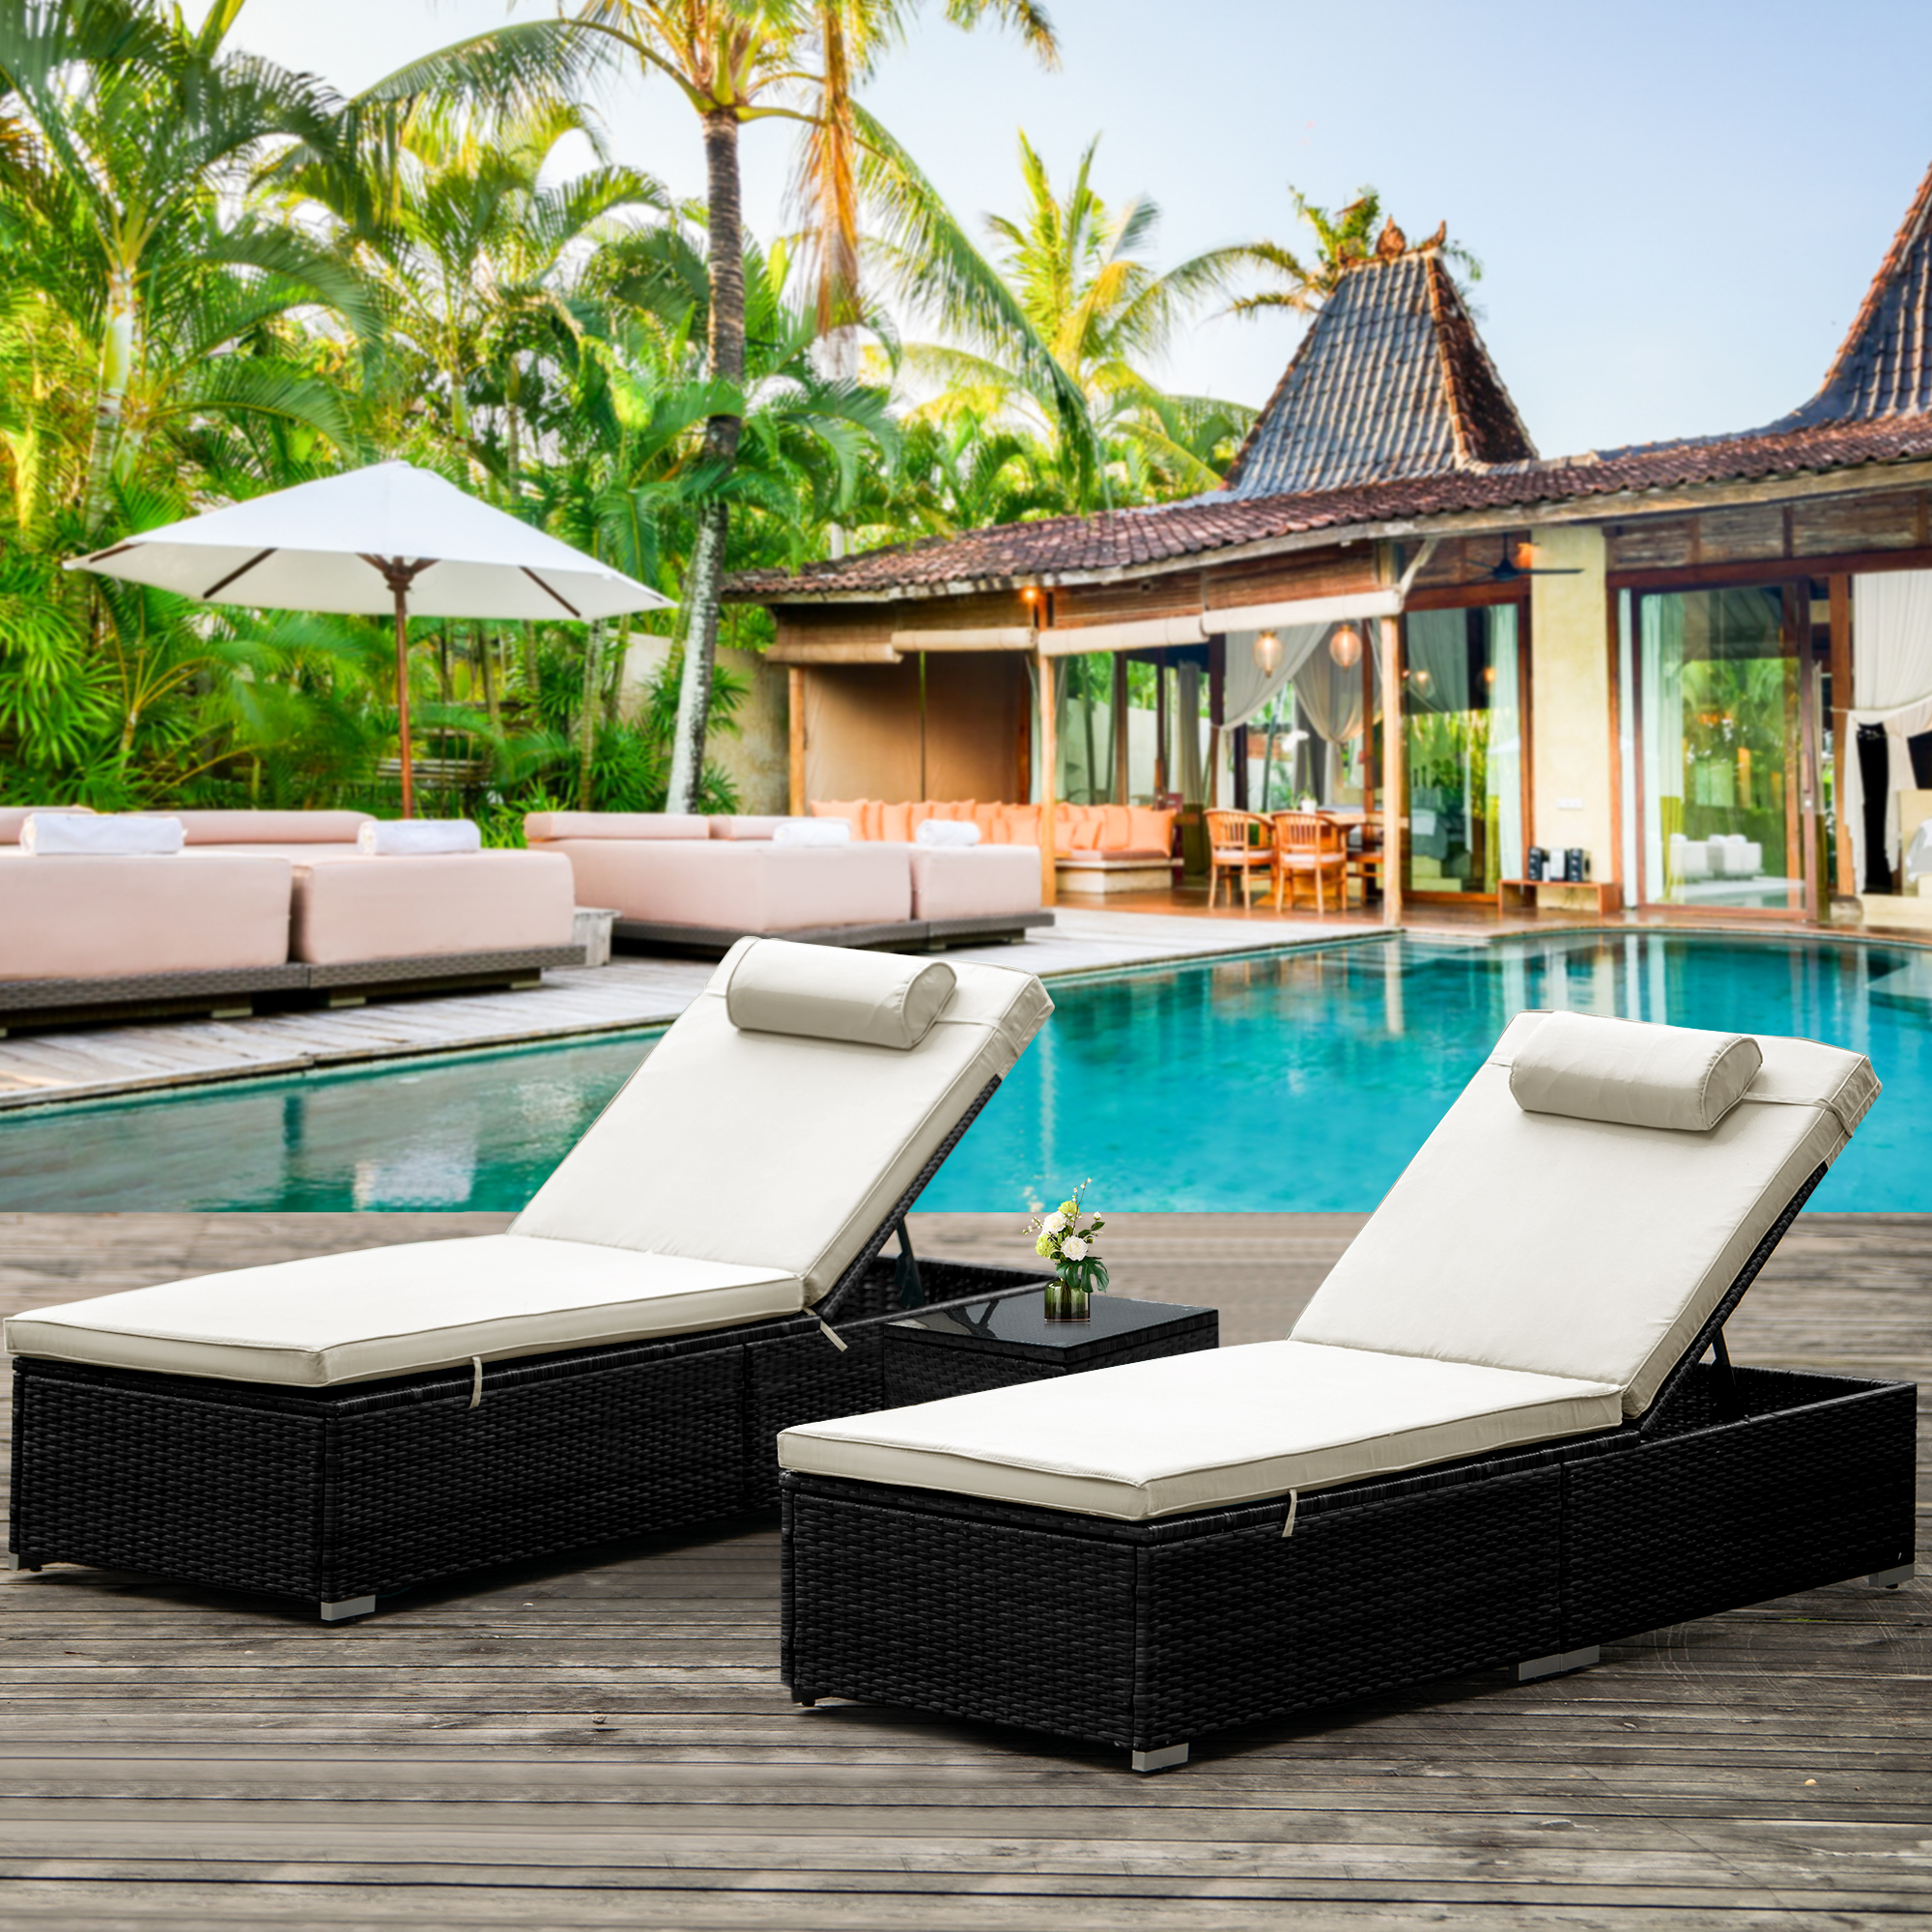 uhomepro 3-Piece Outdoor Patio Furniture Set Chaise Lounge, Patio Reclining Rattan Lounge Chair Chaise Couch Cushioned with Glass Coffee Table, Adjustable Back and Feet, Lounger Chair for Pool Garden - image 1 of 11